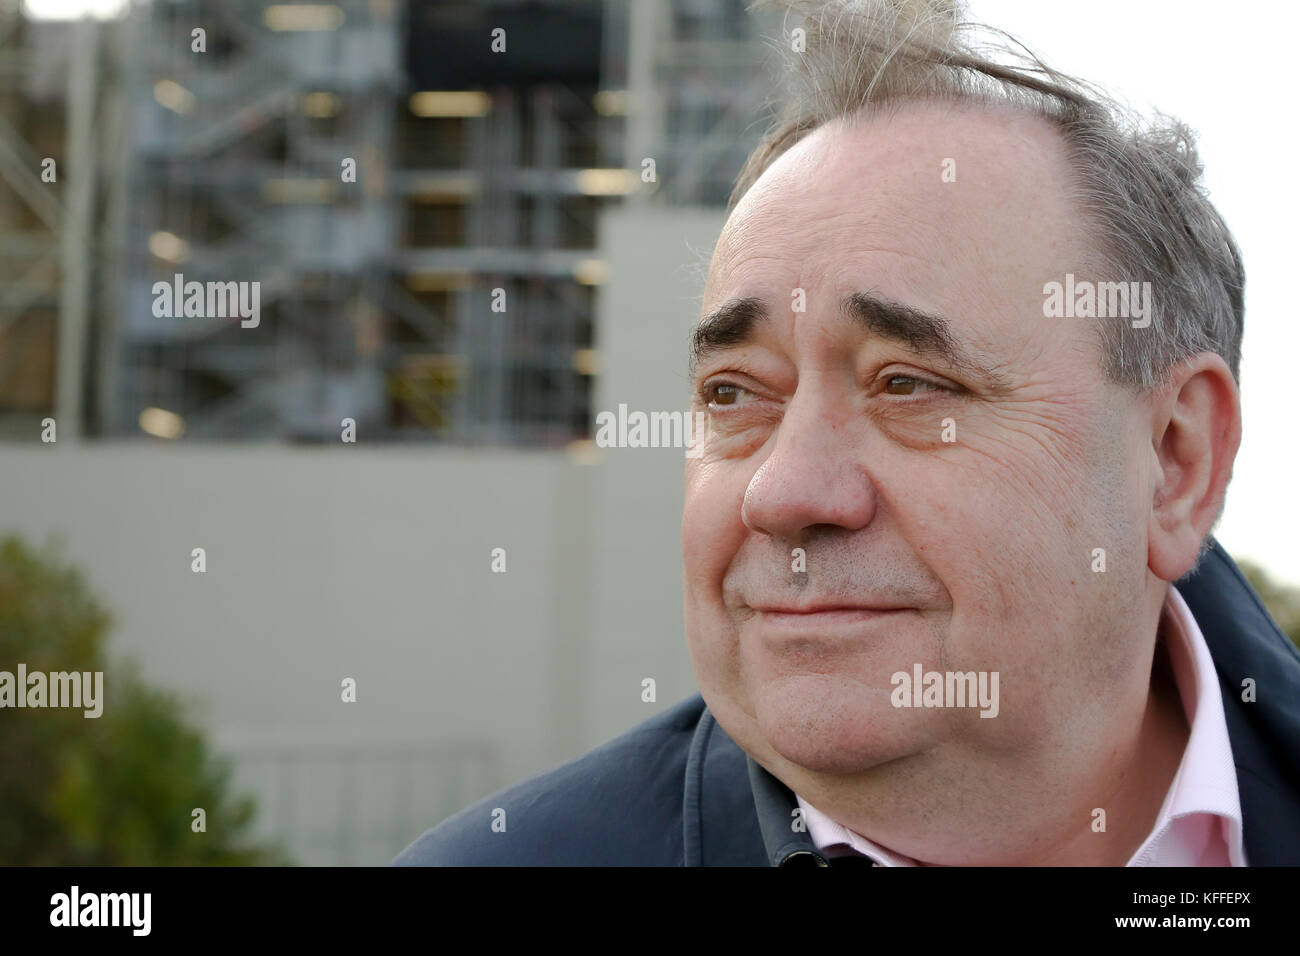 Westminster. London. UK 28 Oct 2017 - Alex Salmond, former First Minister of Scotland on Westminster Bridge Credit: Dinendra Haria/Alamy Live News Stock Photo